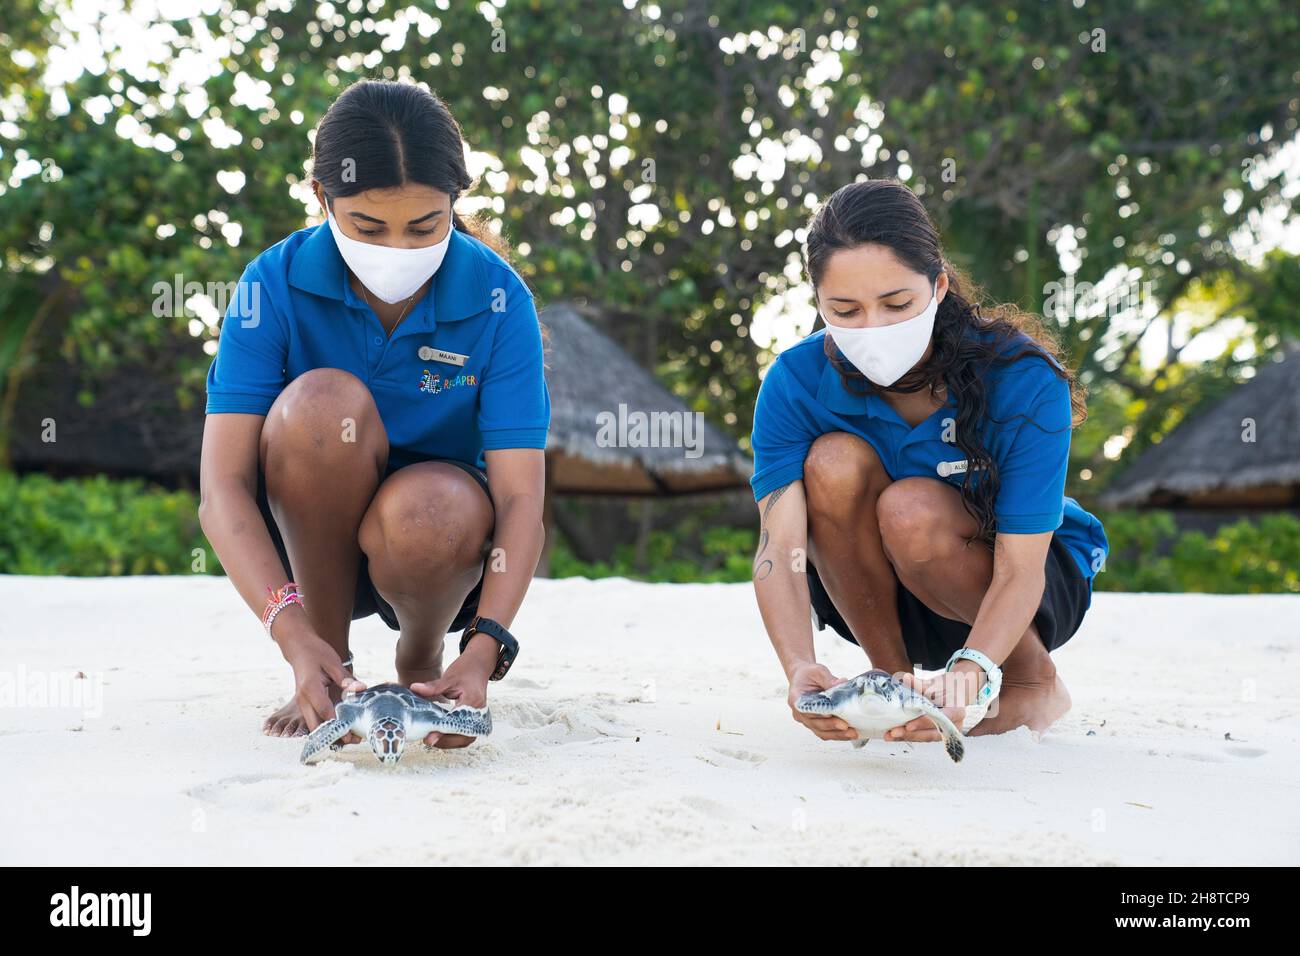 Reefscapers staff Maani and Alejandra release two juvenile sea turtles back into the wild at the Turtle Rehabilitation Centre at Four Seasons Resort at Kuda Huraa, Maldives. Picture date: November 18, 2021. See PA story ENVIRONMENT Turtle Maldives. Maldives-based environmental agency Reefscapers, who release rehabilitated turtles, helped nurse olive ridley sea turtle April back to health before she was relocated to her new home at Sea Life Loch Lomond. April was found floating on the ocean surface in Raa Atoll in the Maldives, entangled in a discarded fishing net with her front right flipper m Stock Photo